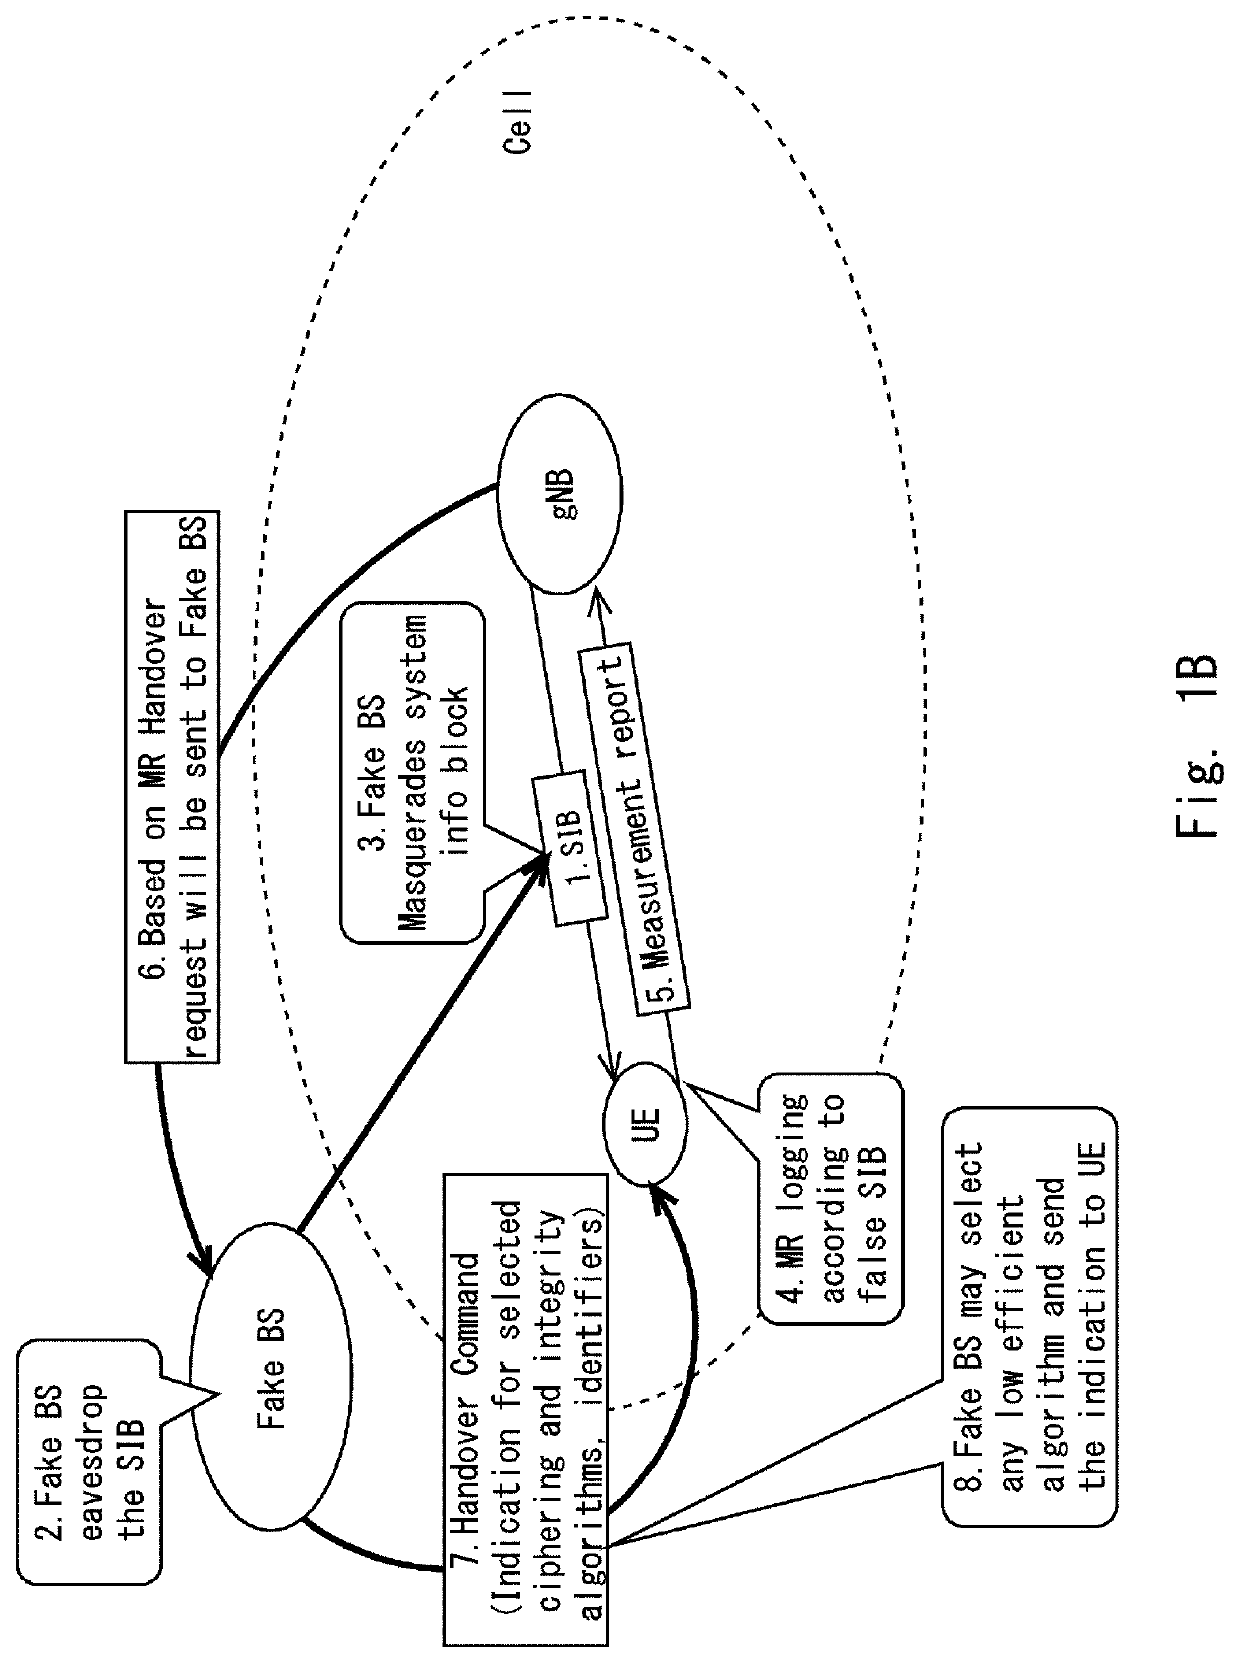 Source base station, ue, method in wireless communication system